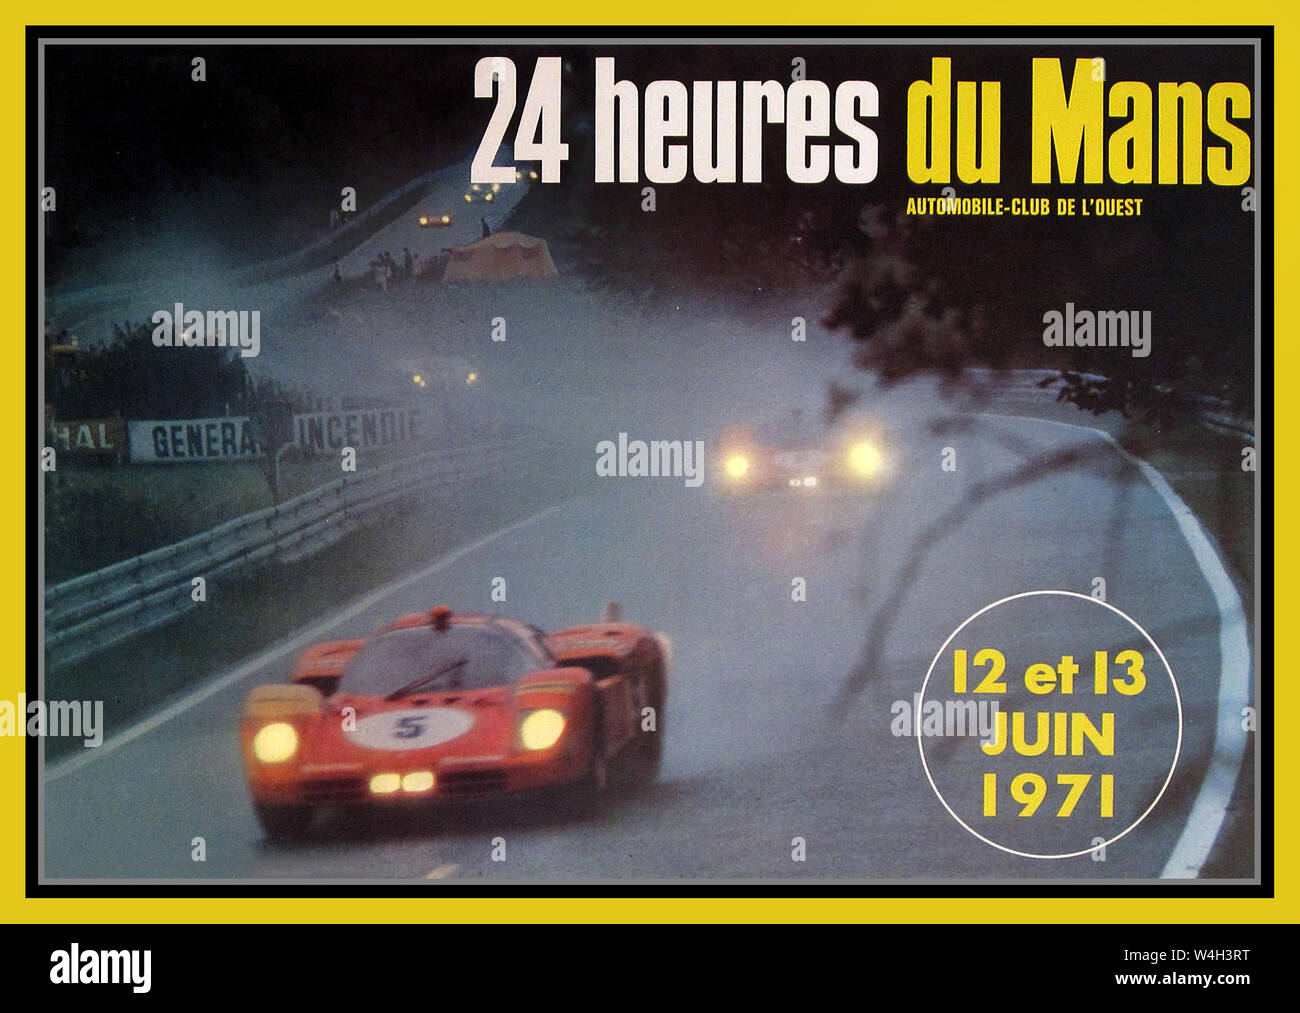 Vintage Poster 24 heures du Mans Juin 1971 24 Hrs Le Mans Motor Race June 12/13th 1971 Only twelve cars were classified at the finish. Winners, at a record speed, were Gijs van Lennep and Helmut Marko in their Team Martini Porsche 917. Stock Photo